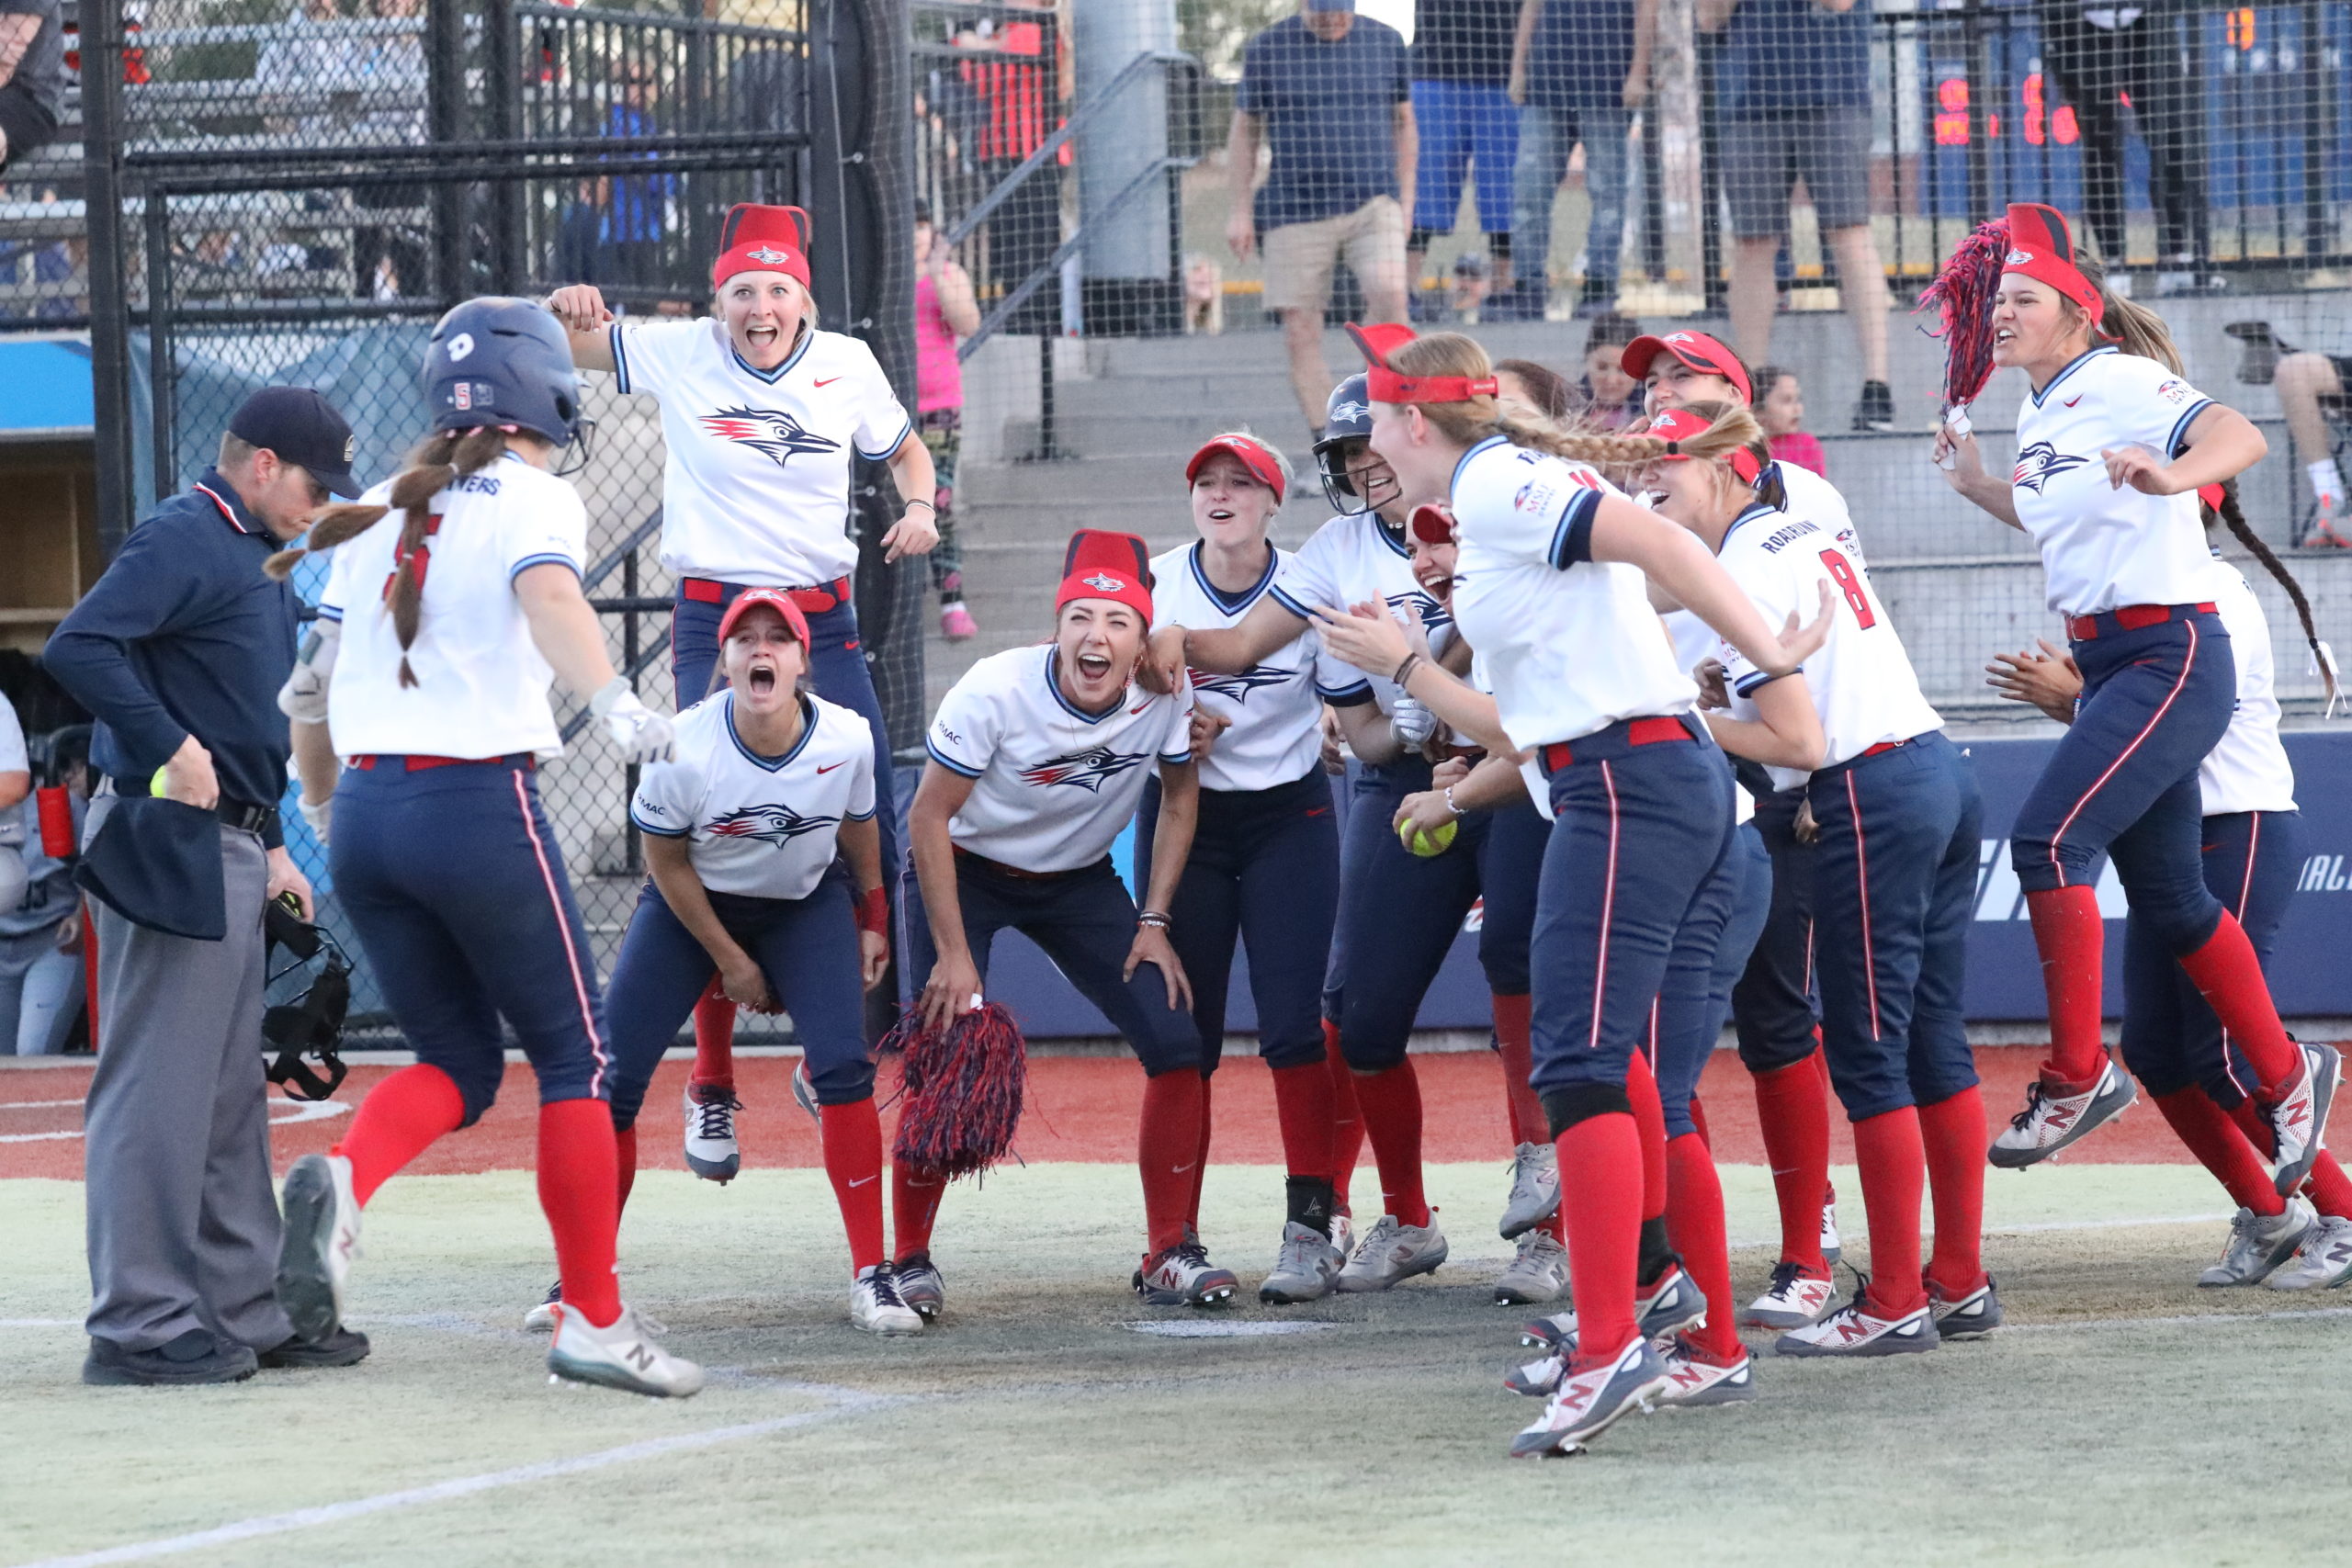 Softball player Shelby Robb approaches home plate after a walk-off home run as her teammates enthusiastically wait to greet her.